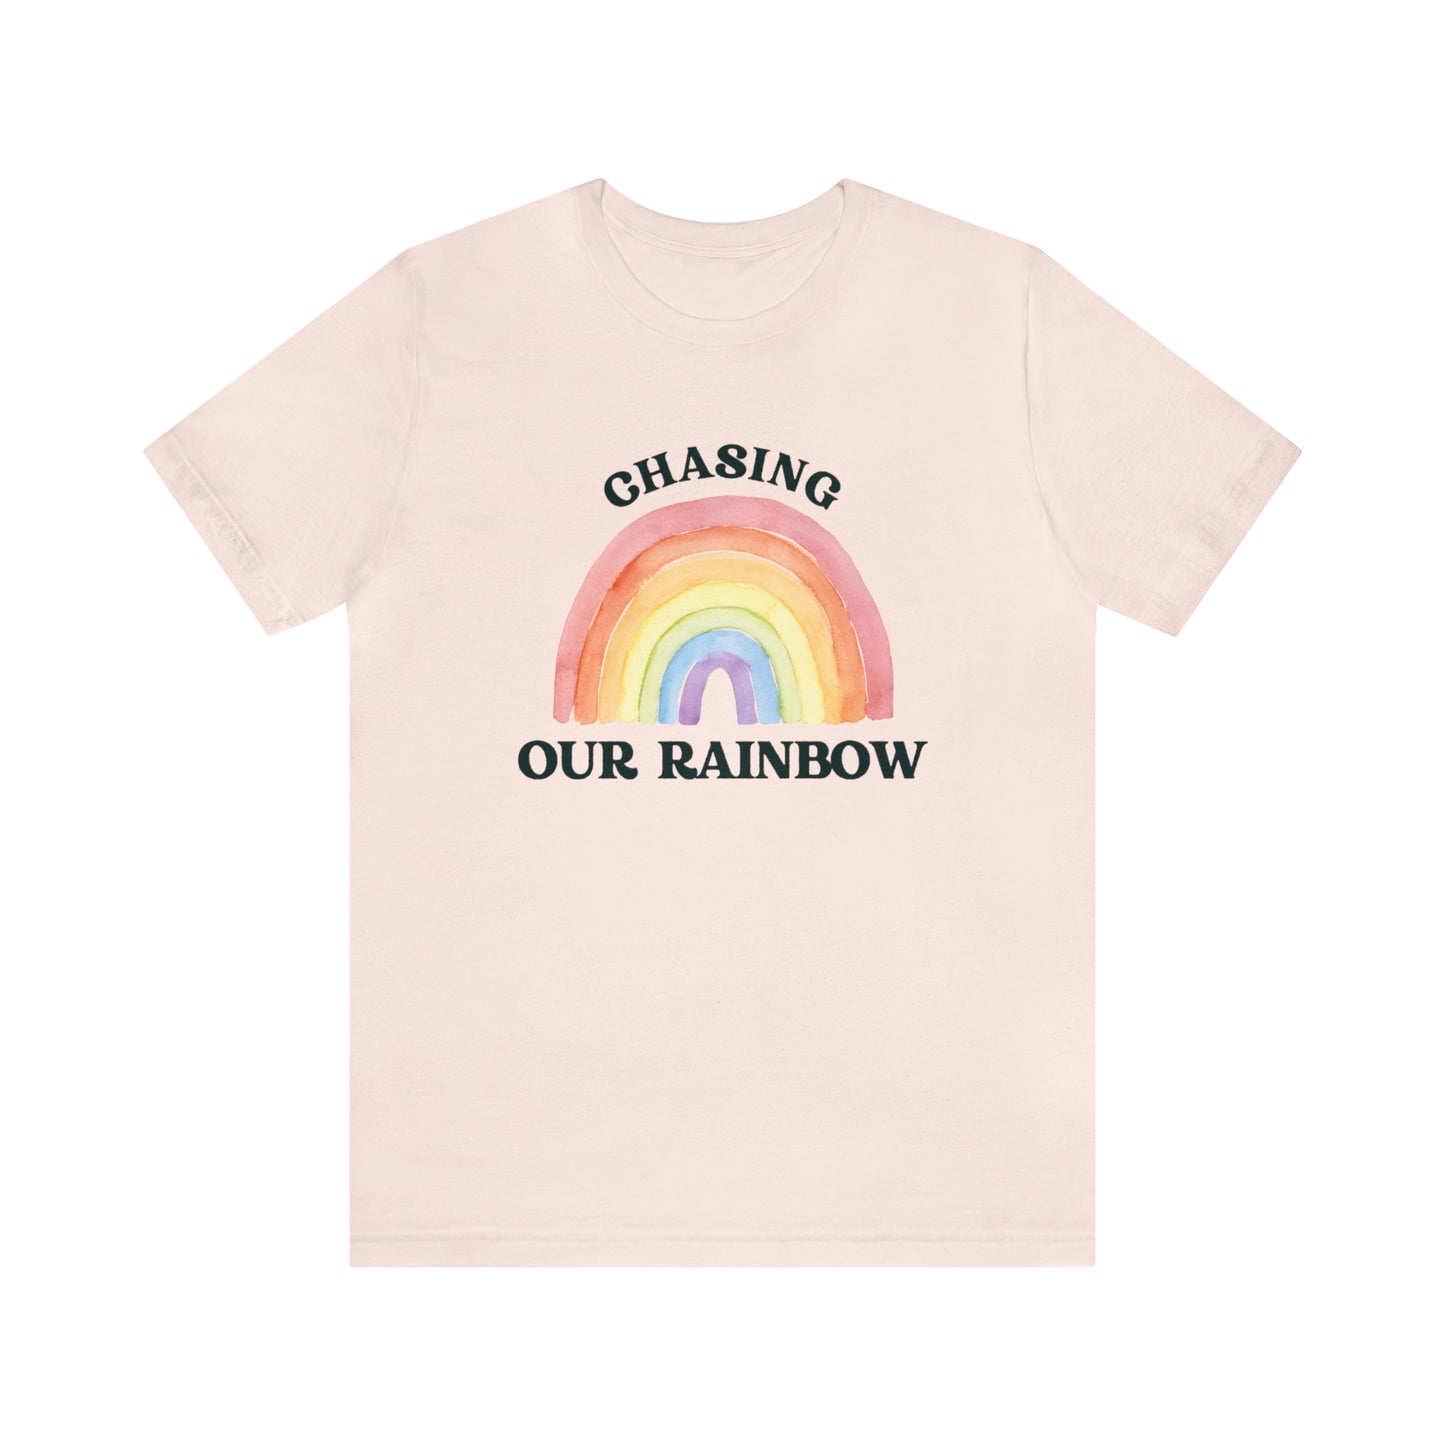 "Chasing Our Rainbow" Bella Canvas Short Sleeve Tee